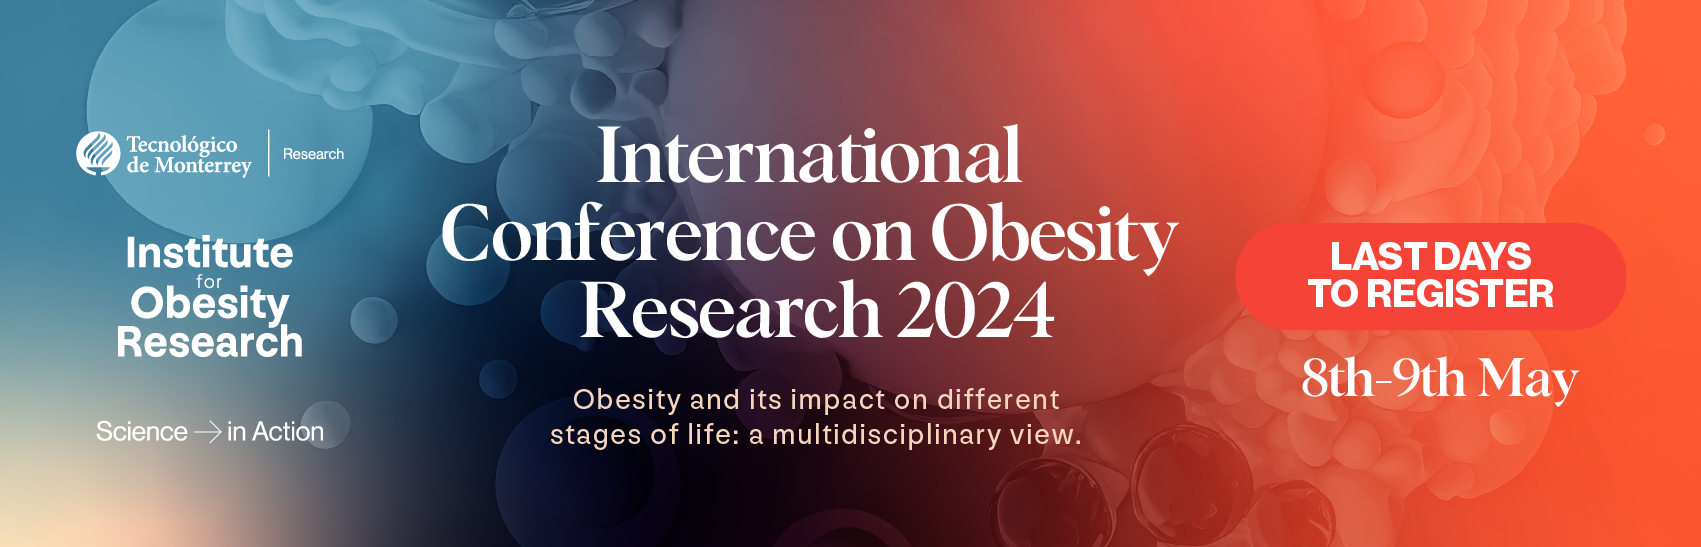 Register International Conference on Obesity Research